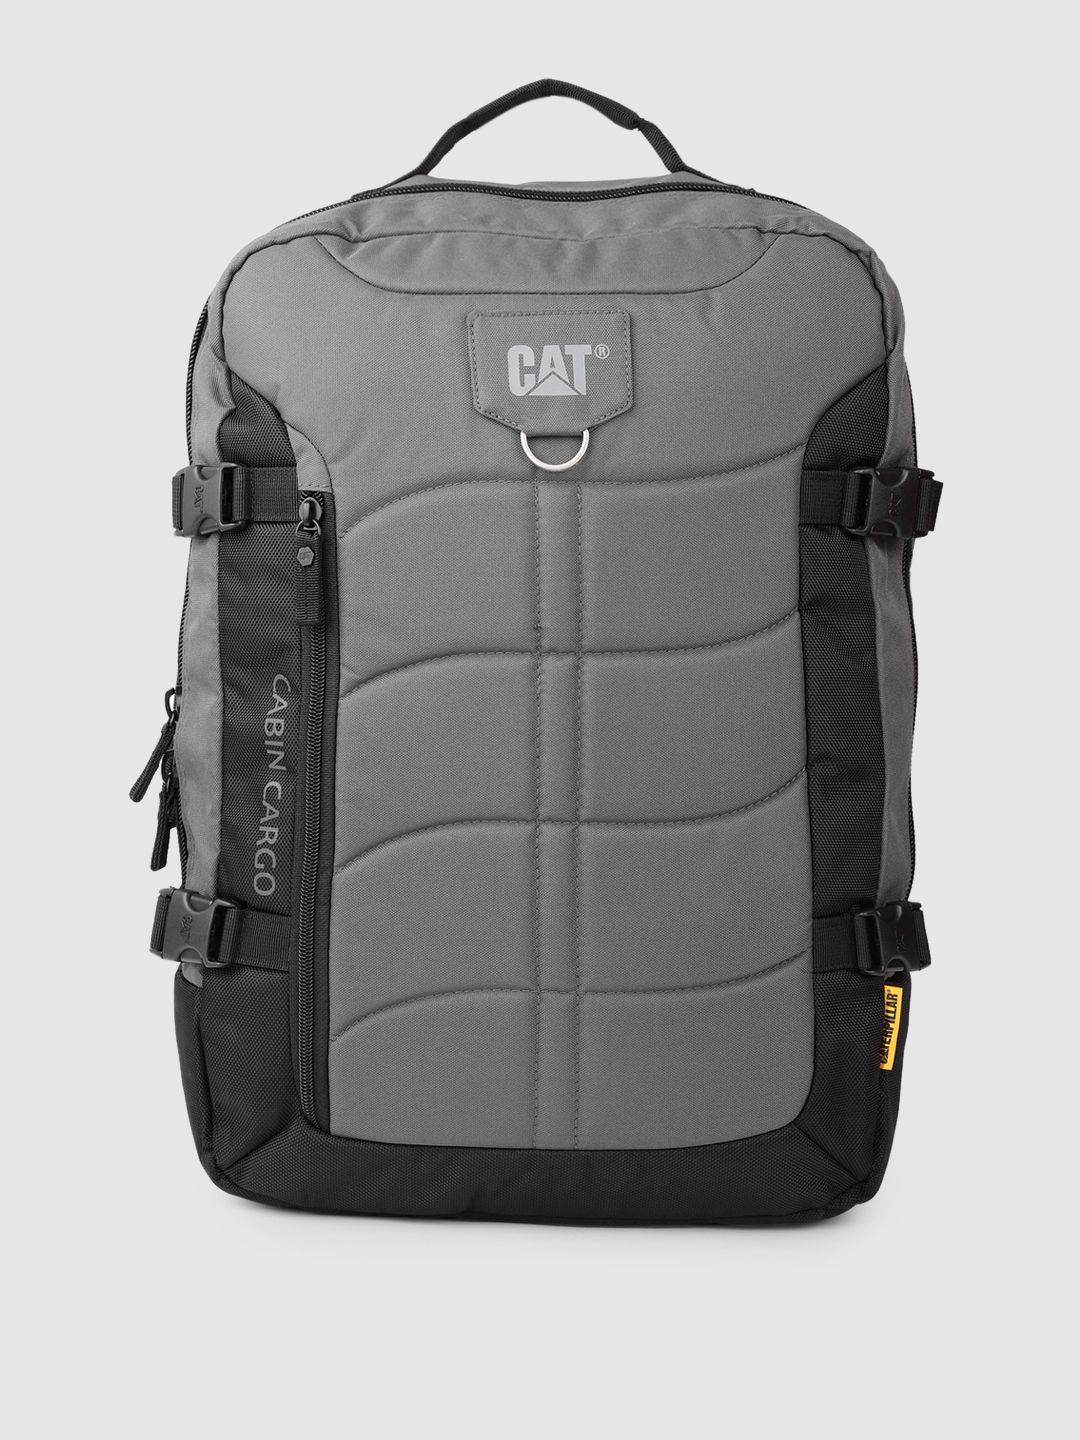 CAT Black Backpack with Compression Straps Price in India